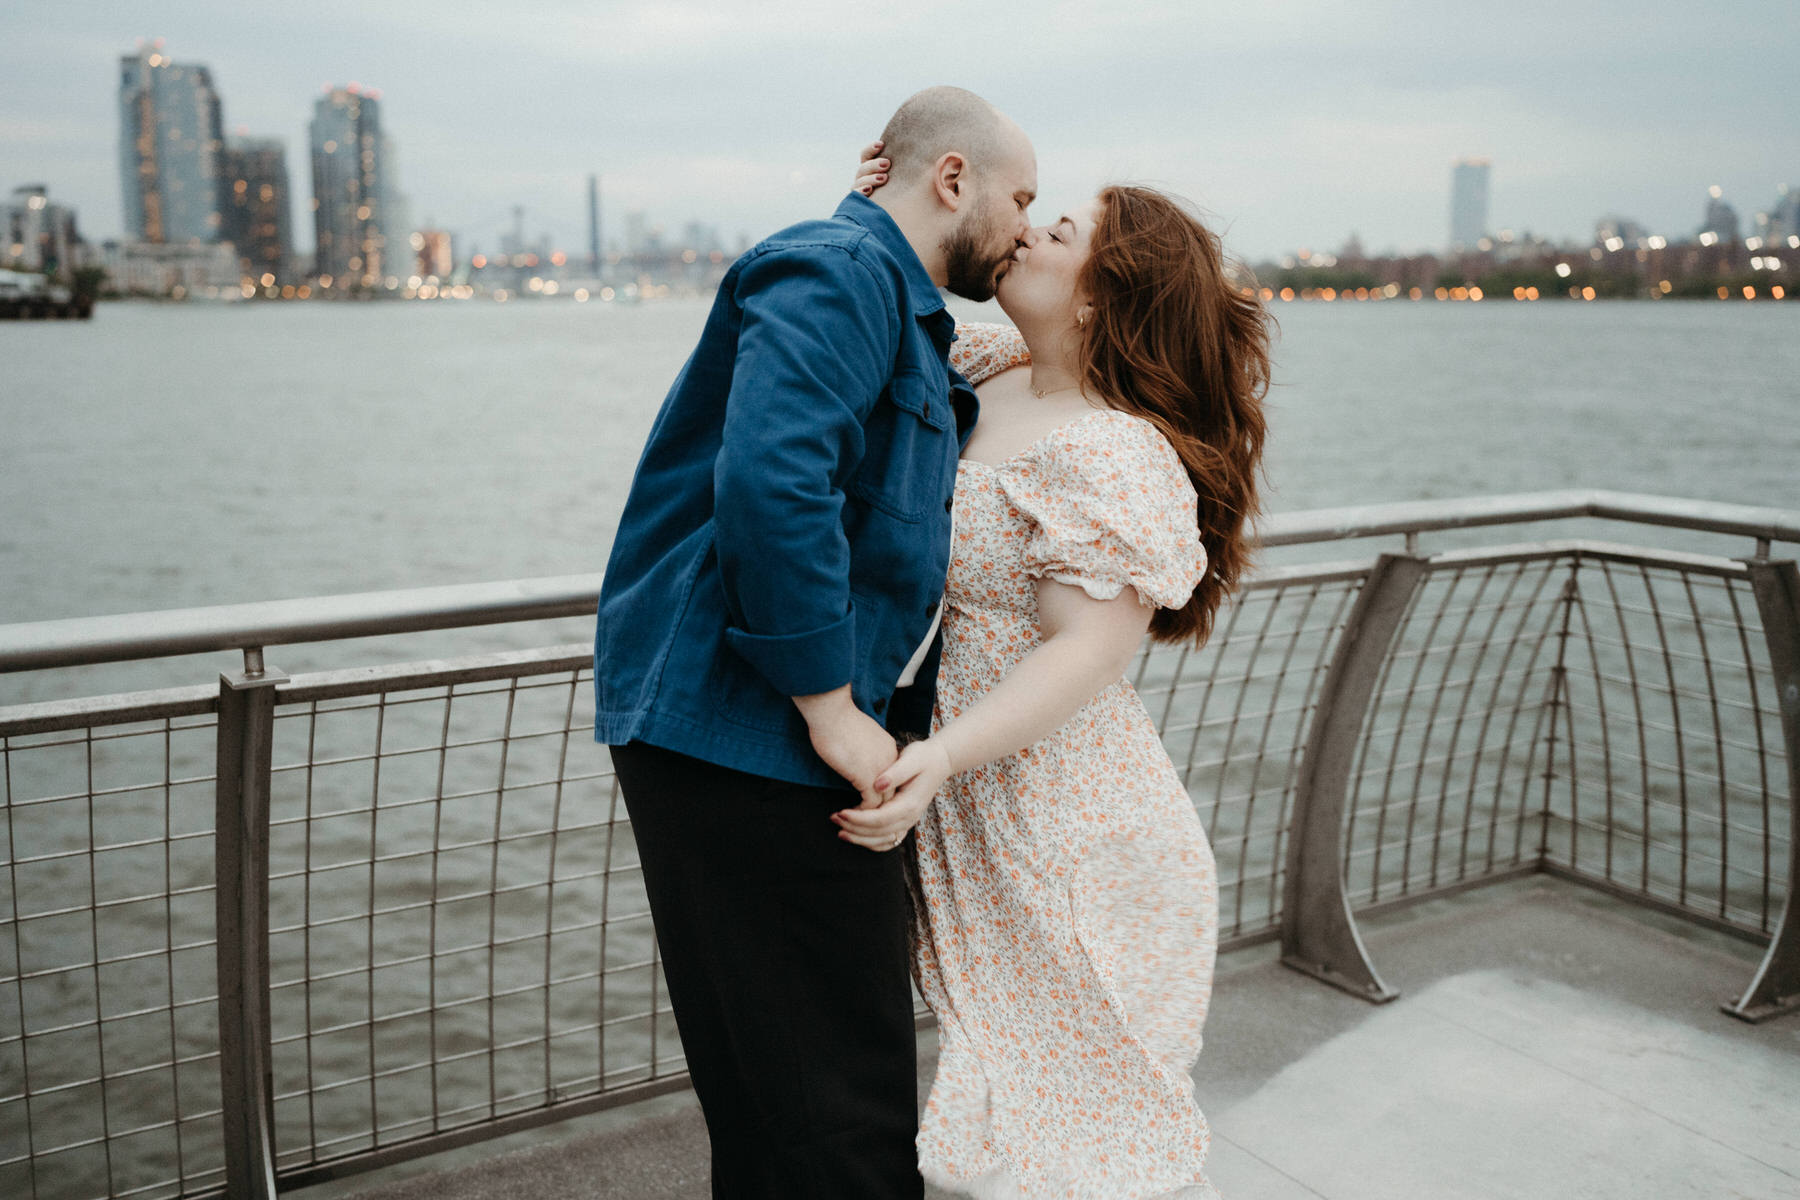 Devin & Kelly’s Greenpoint Brooklyn Engagement Session